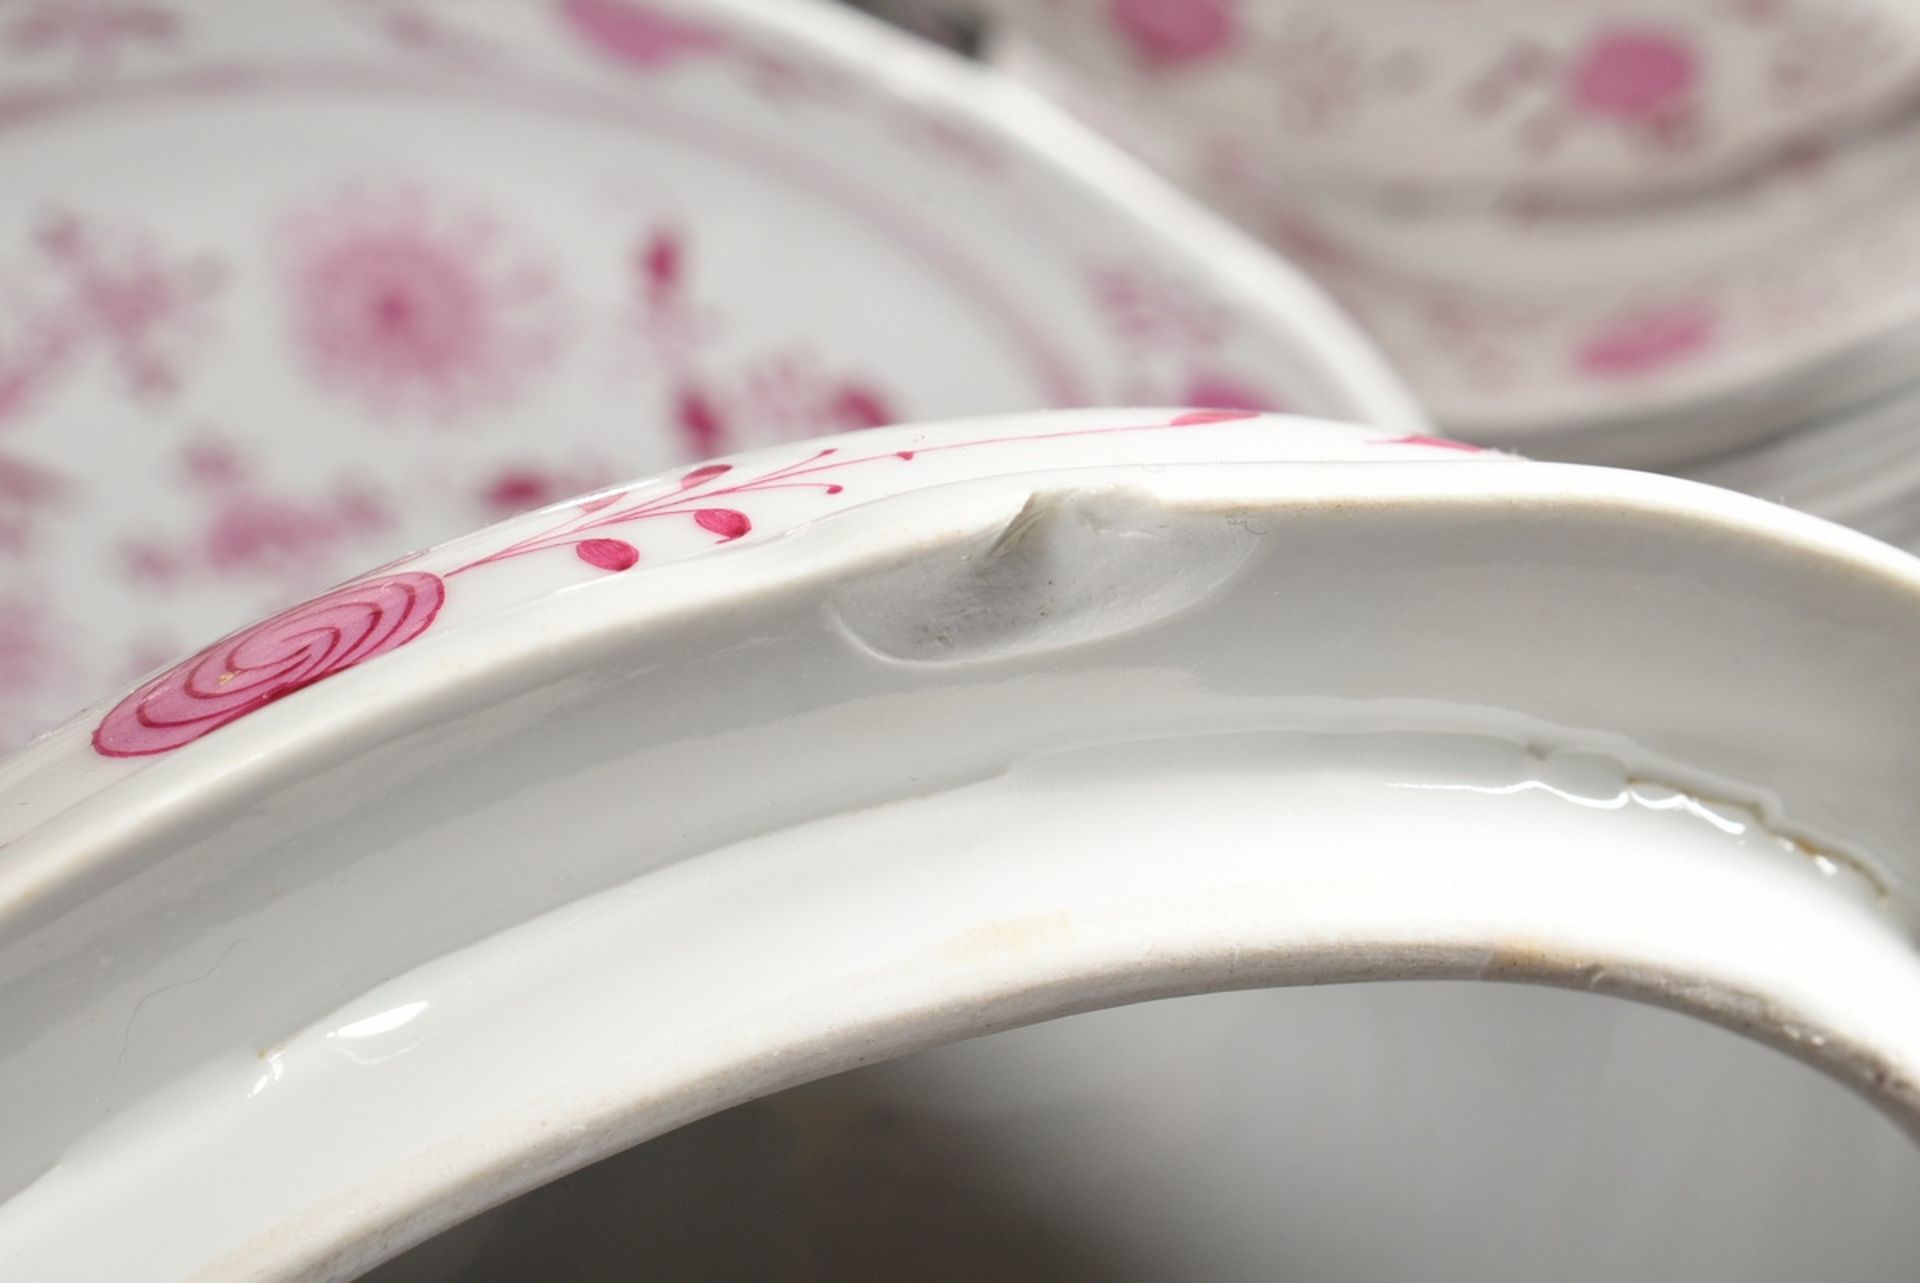 65 Pieces rare Meissen dinner service "Zwiebelmuster Pink", custom made around 1900, consisting of: - Image 19 of 27